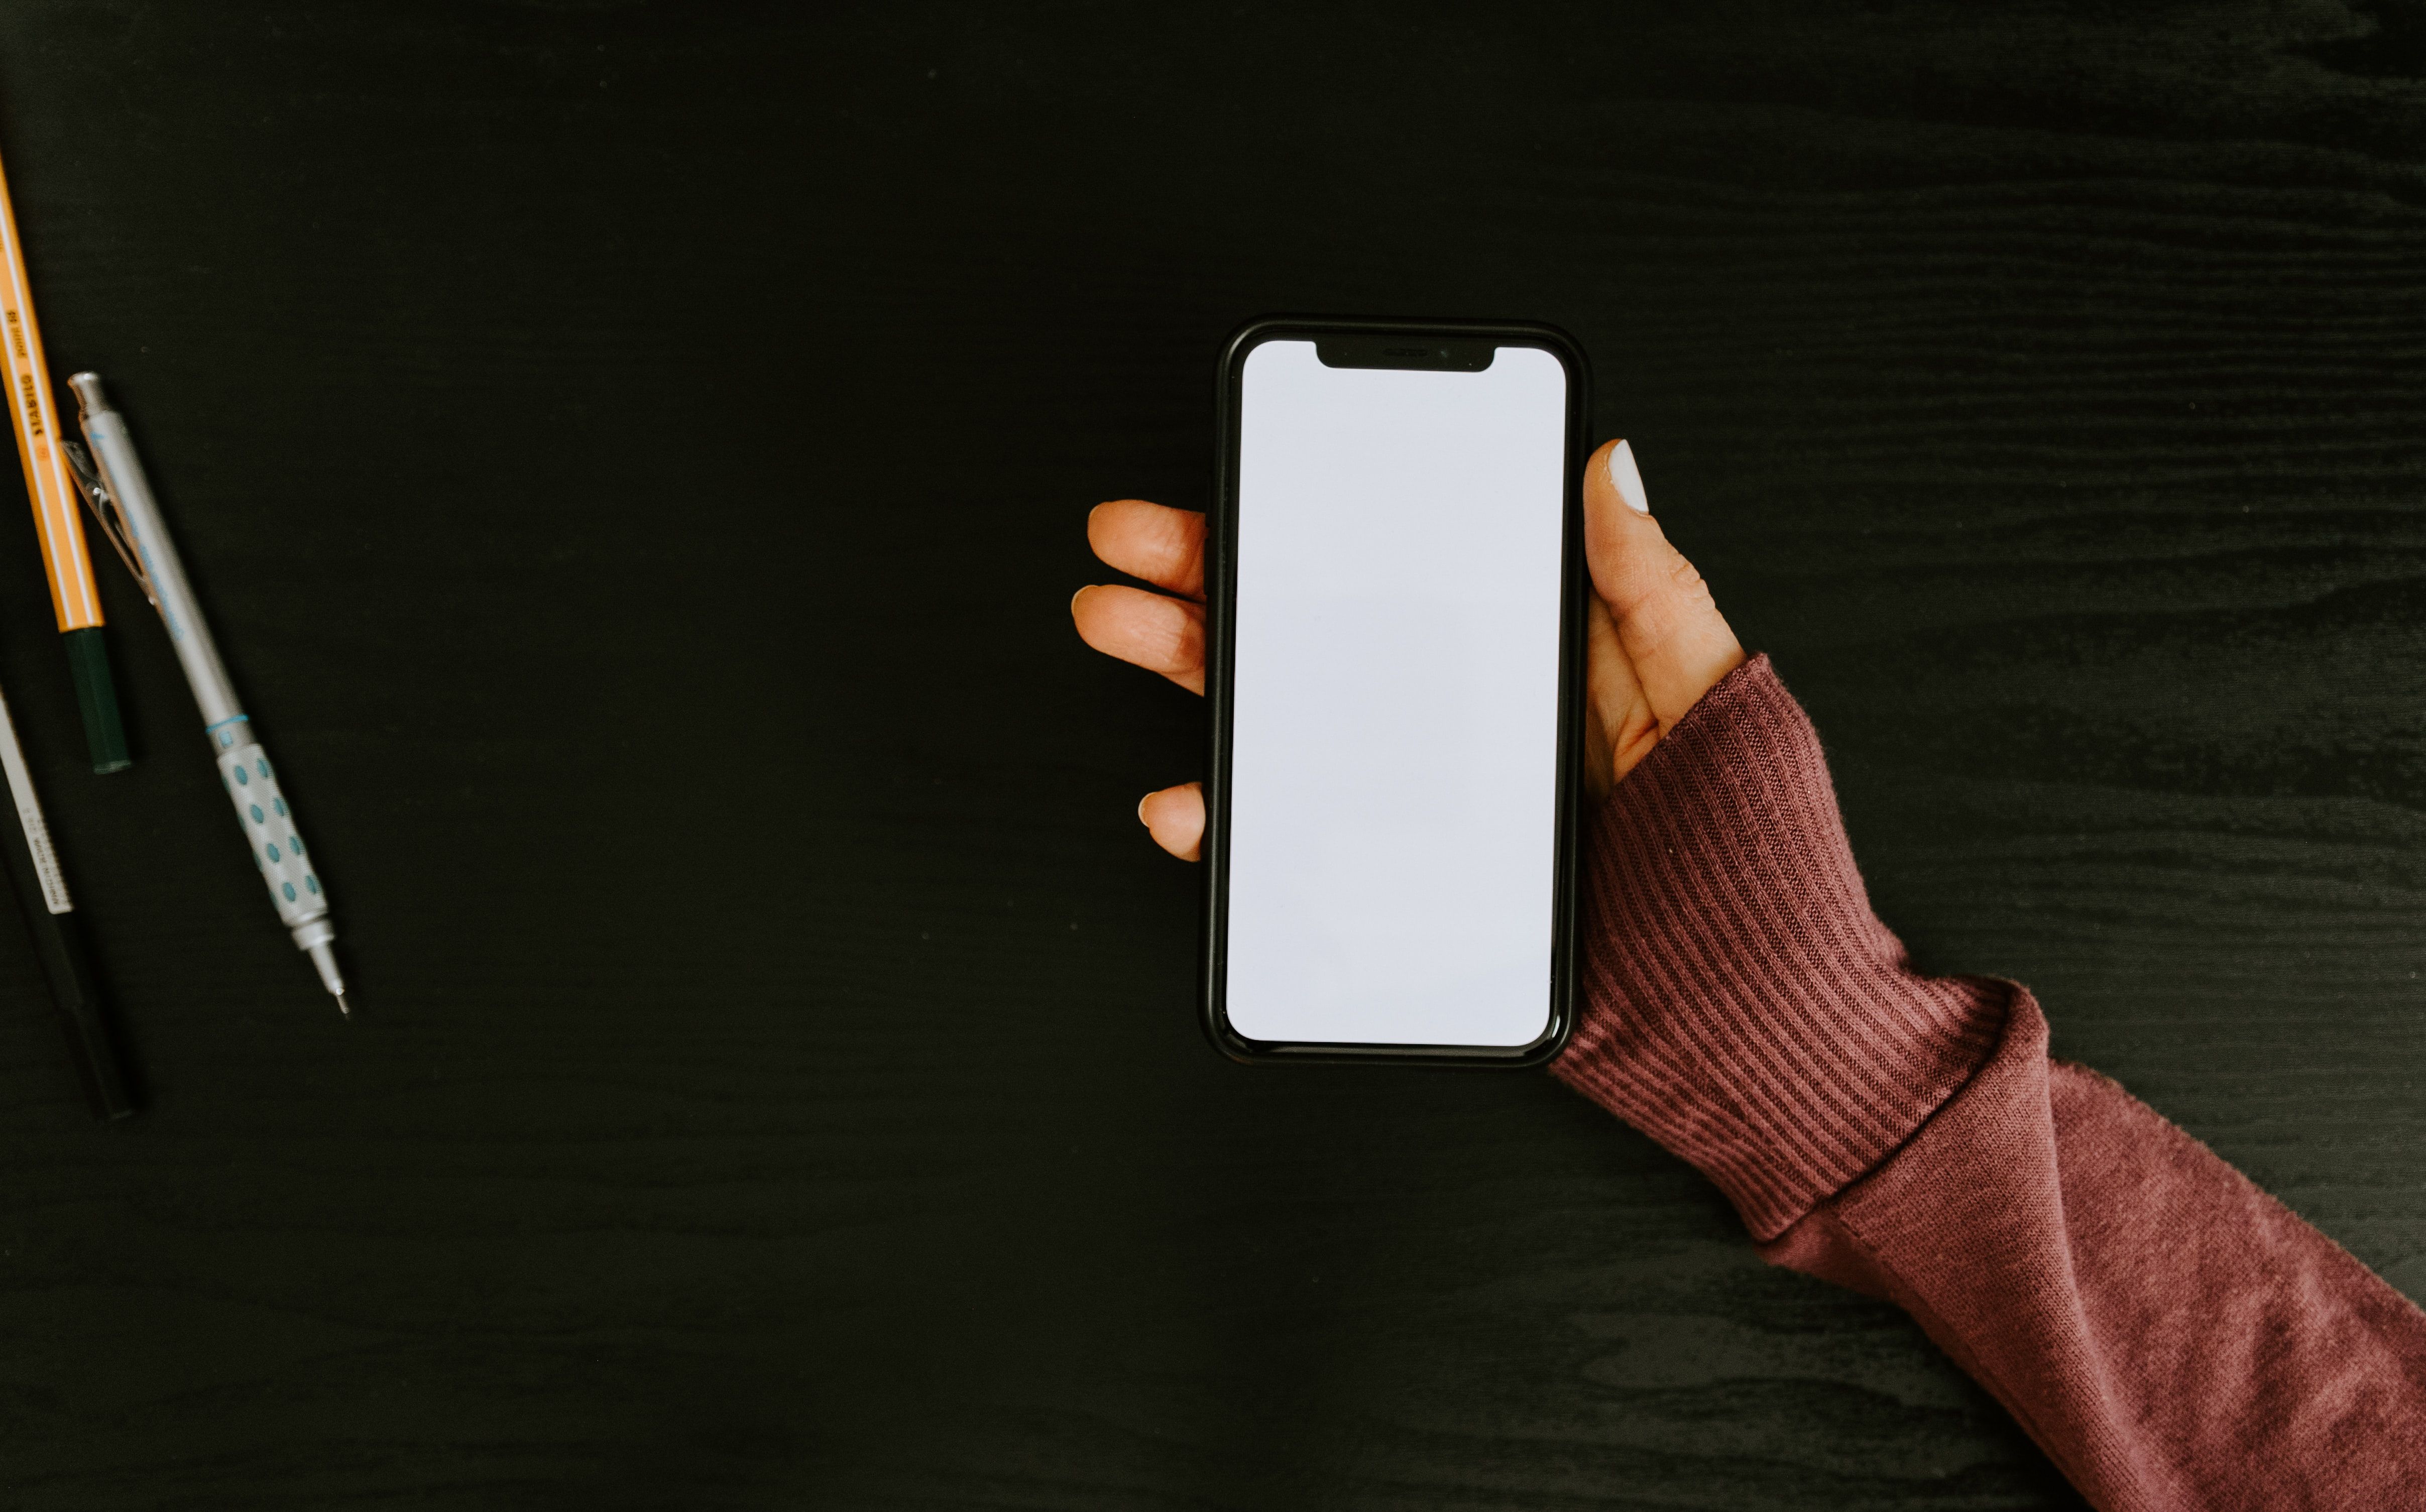 photo of someone holding an iphone with a blank screen